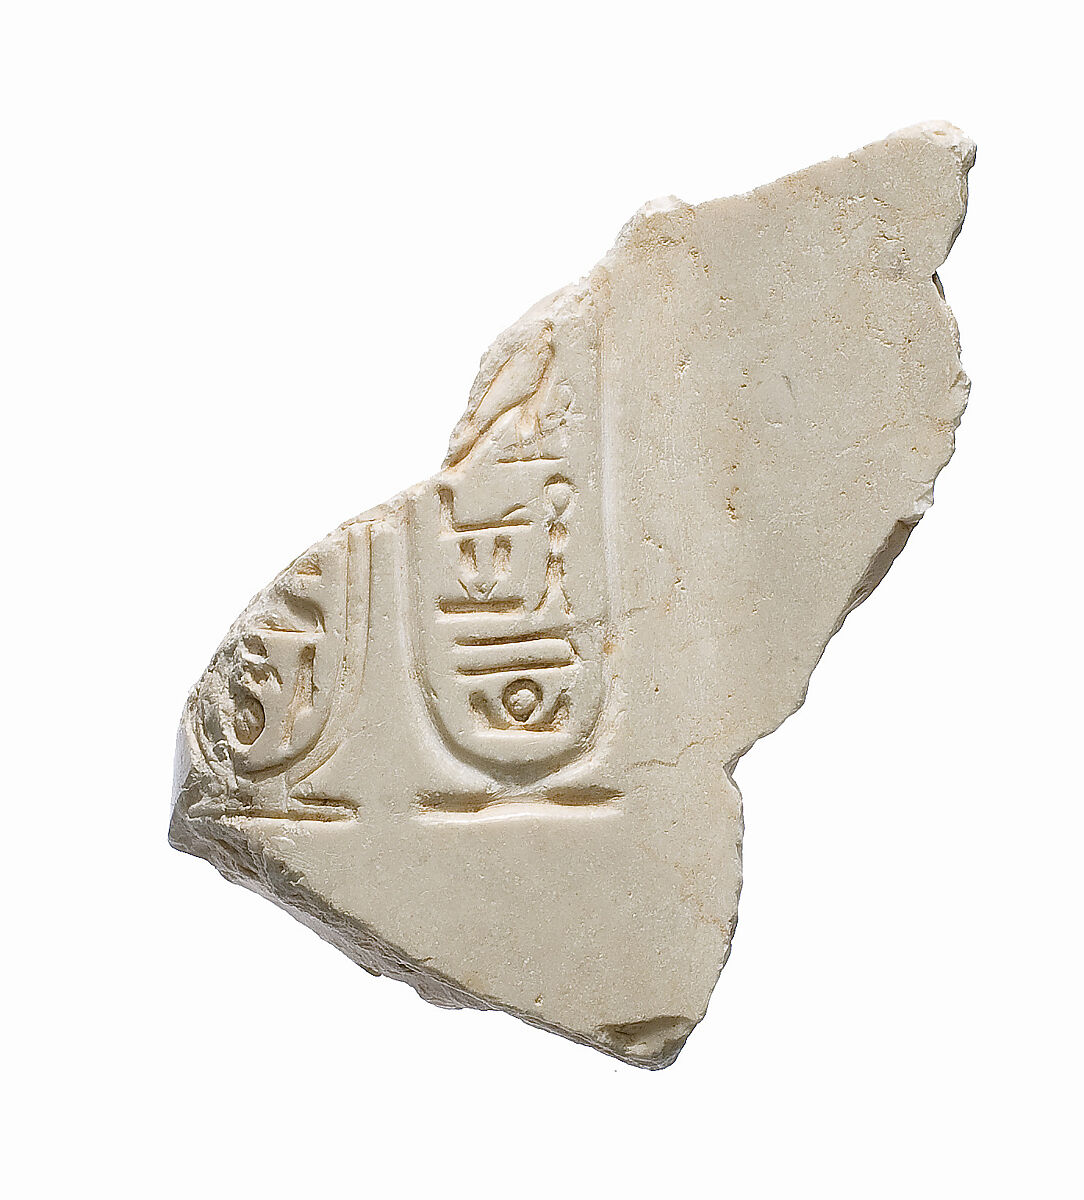 Arm with Aten cartouches belonging with 21.9.431, Indurated limestone 